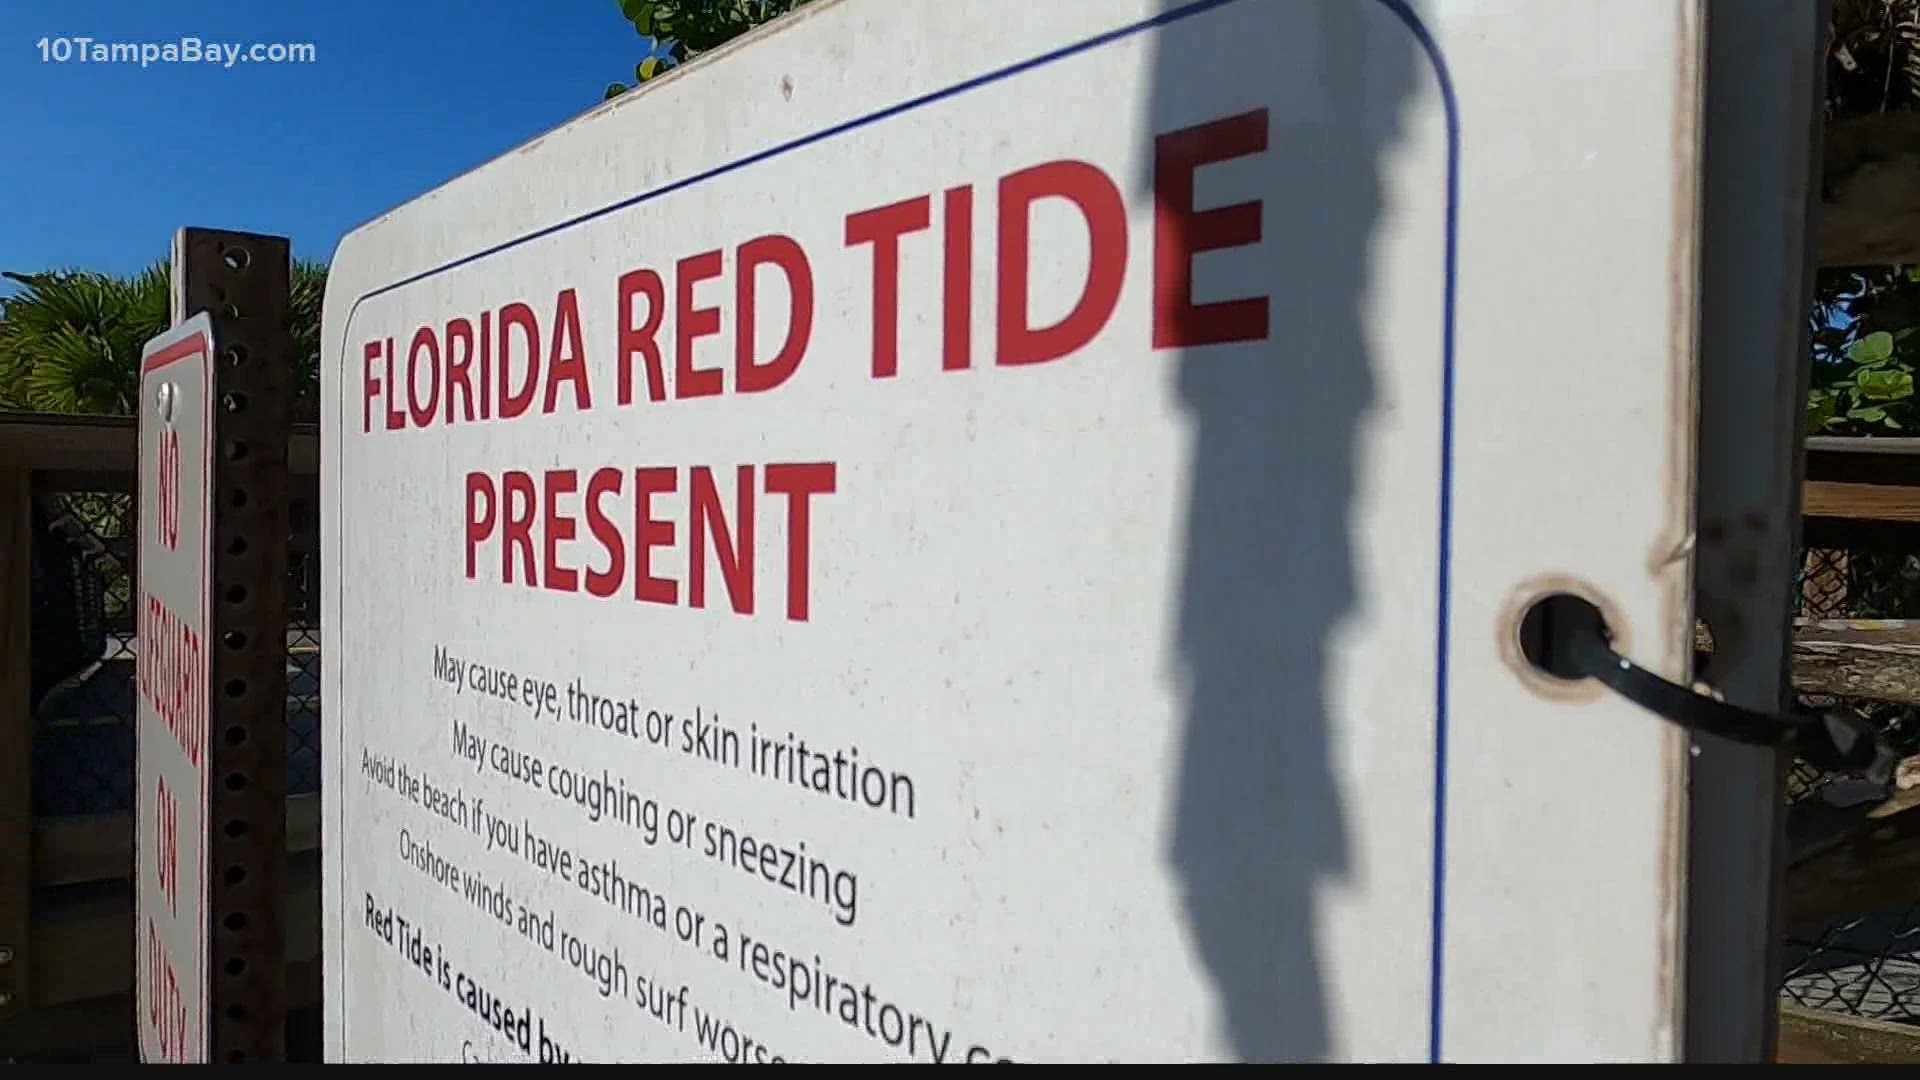 The NWS said there's a chance for respiratory irritation from the algae bloom to impact people in some coastal areas.